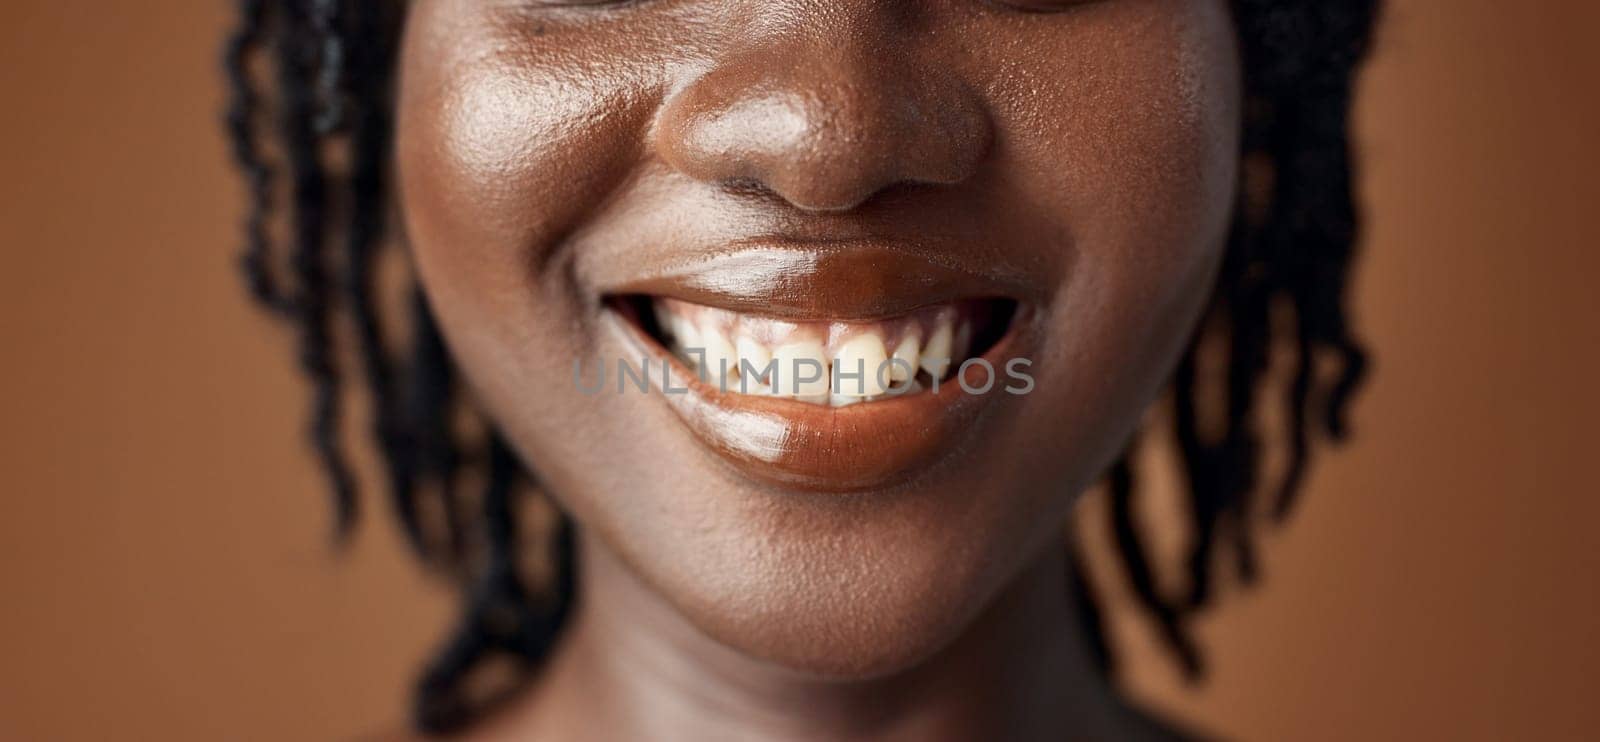 Woman, teeth closeup or smile for dental care, oral hygiene or healthy wellness on brown background. Mouth, lips or face of a happy model in studio for tooth whitening, beauty or dentist treatment.